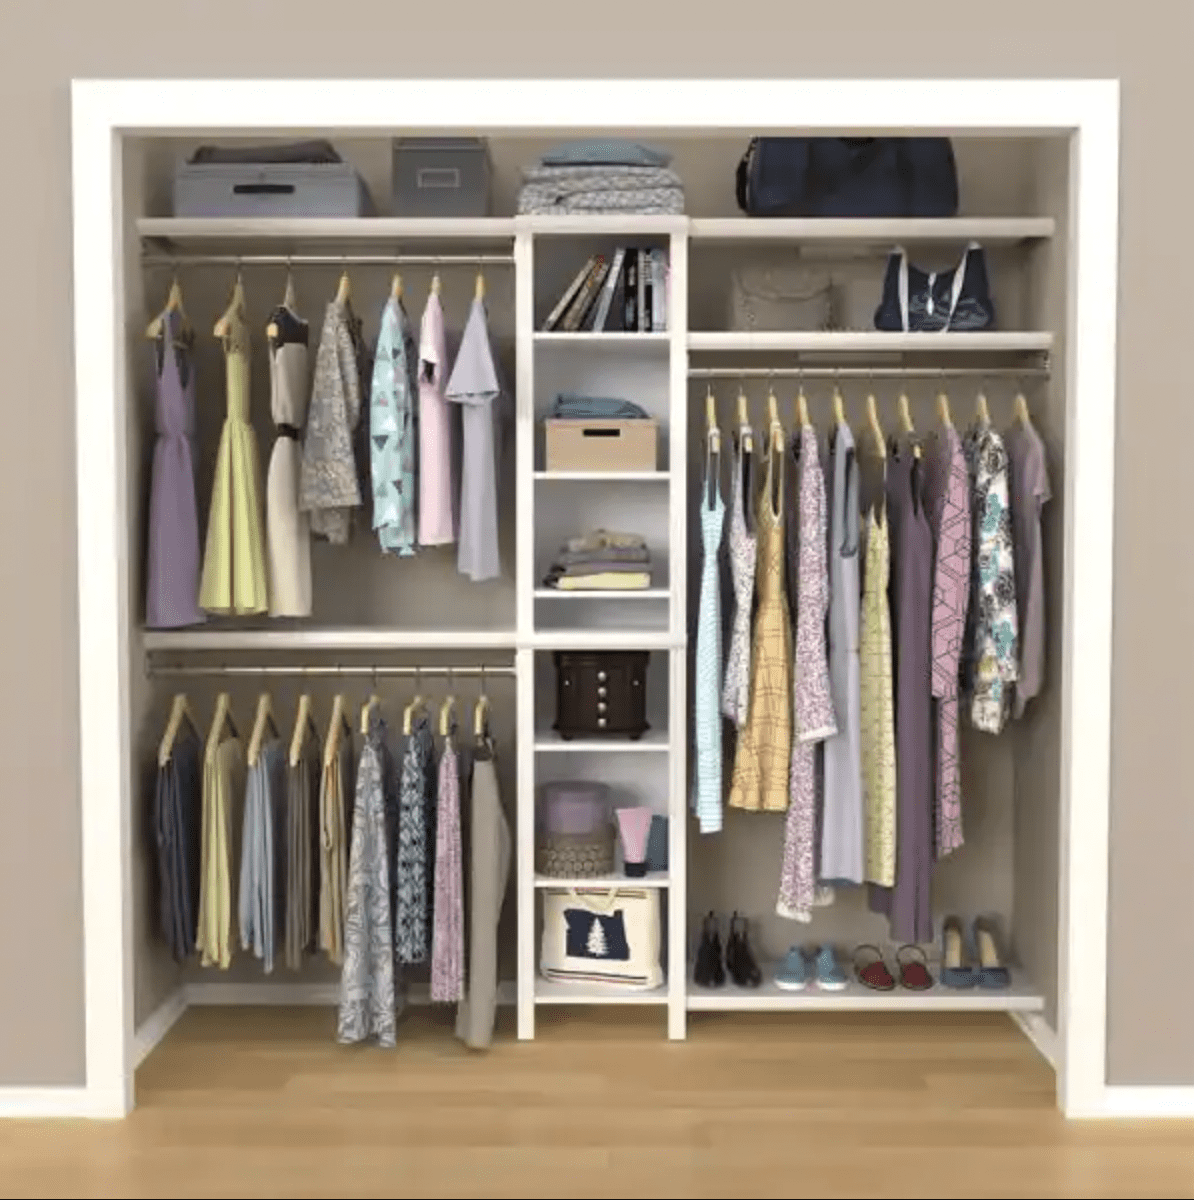 https://cdn.apartmenttherapy.info/image/upload/v1660757948/gen-workflow/product-database/white-closetmaid-wood-closet-systems-home-depot.png